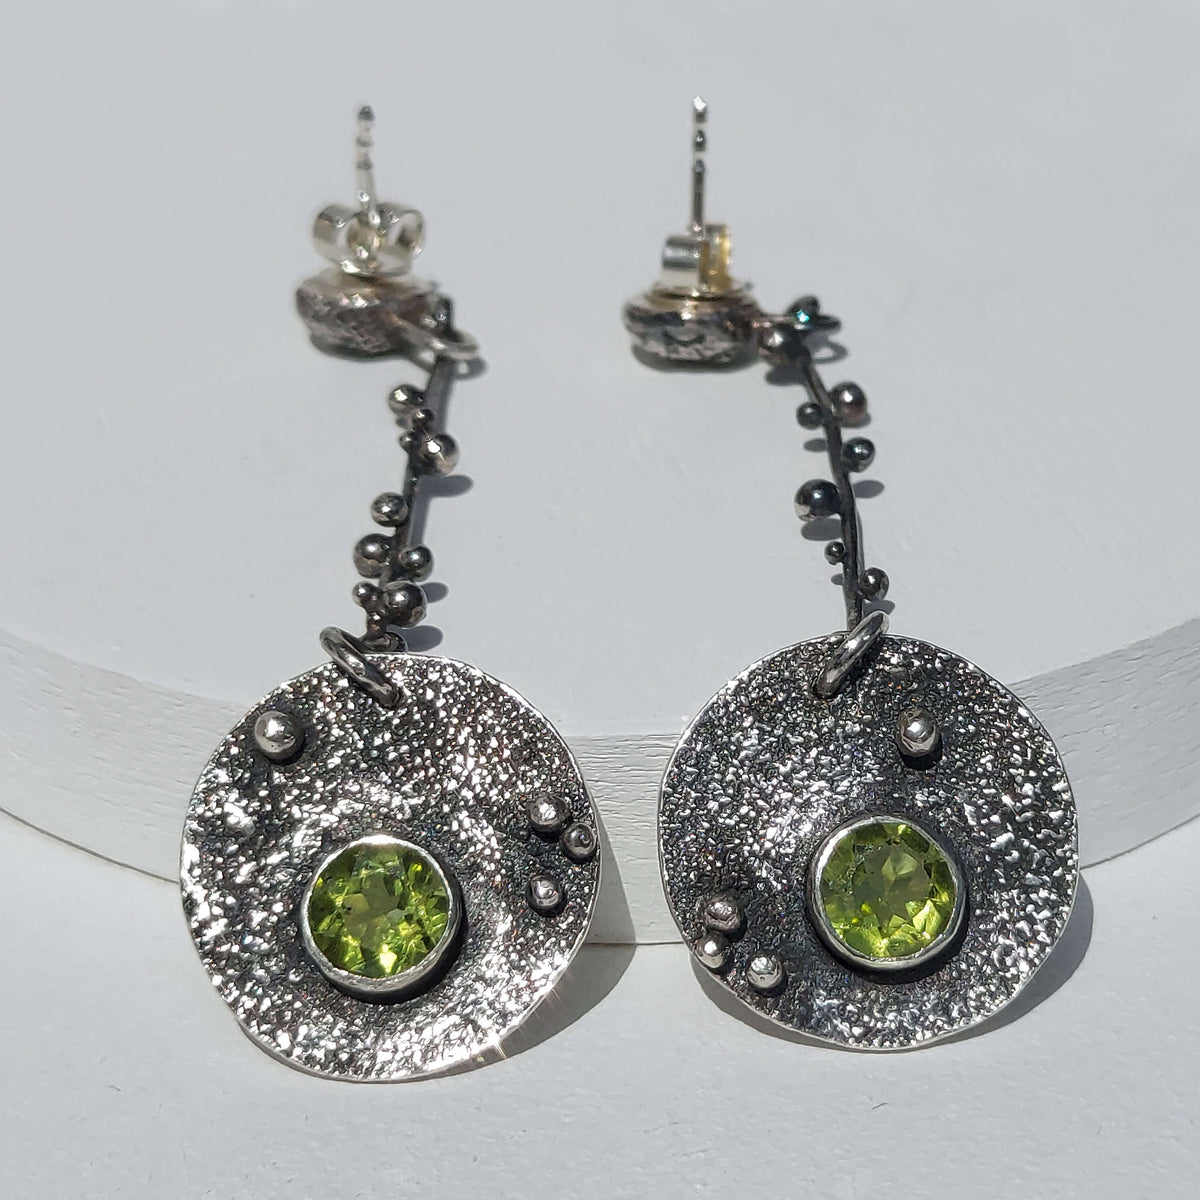 rough textured dangle earrings with peridot. handmade statement earrings by roffjewellery.com